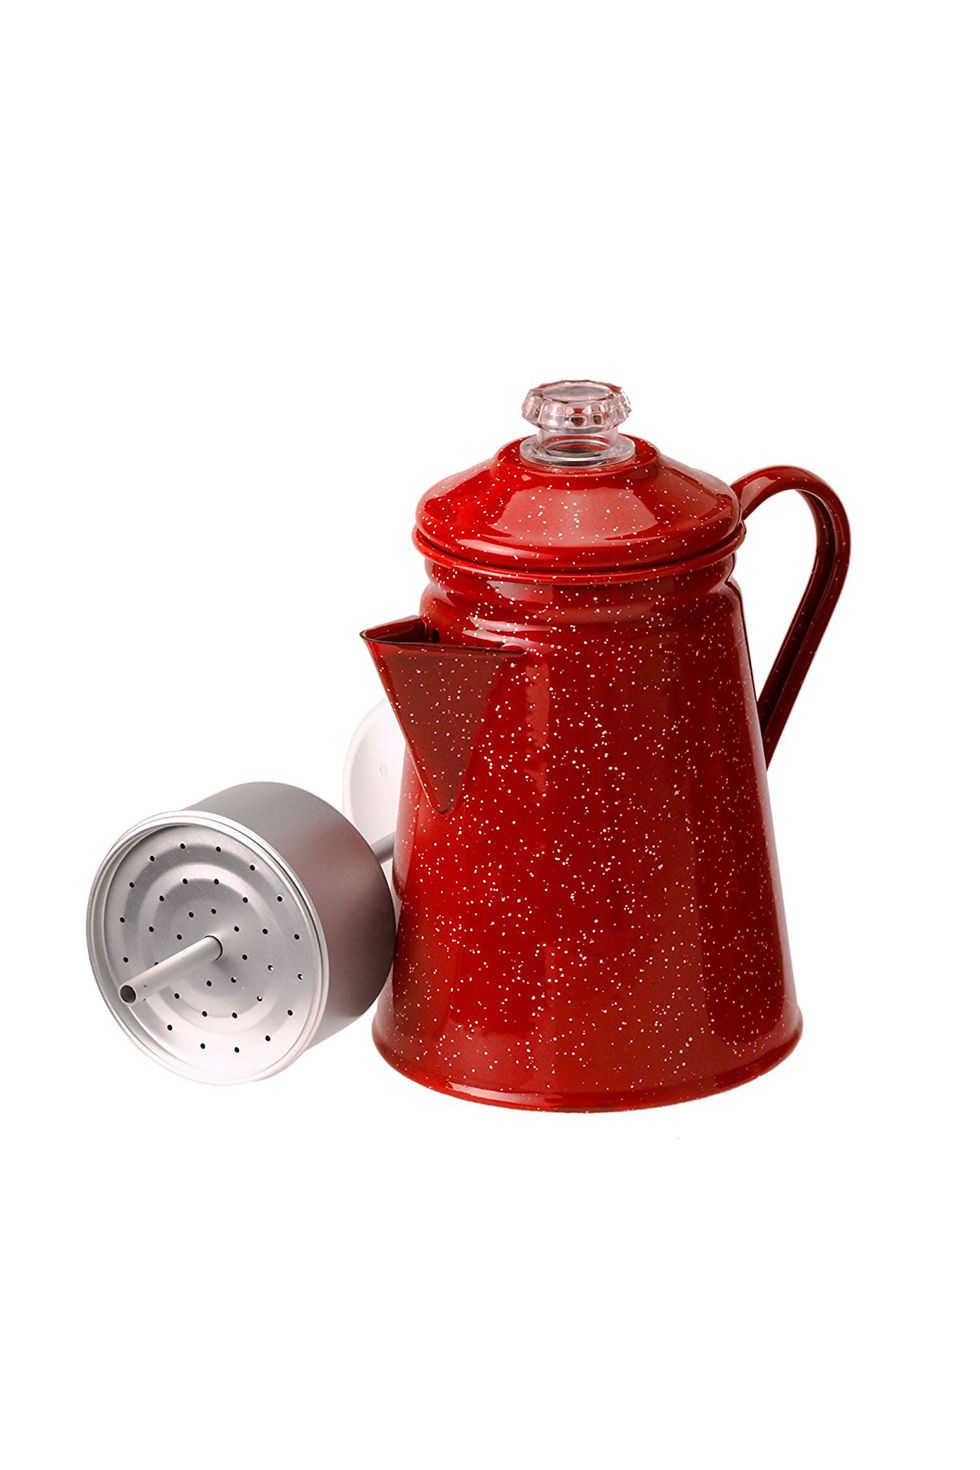 The 10 Best Camping Coffee Pots & Kettles in 2023